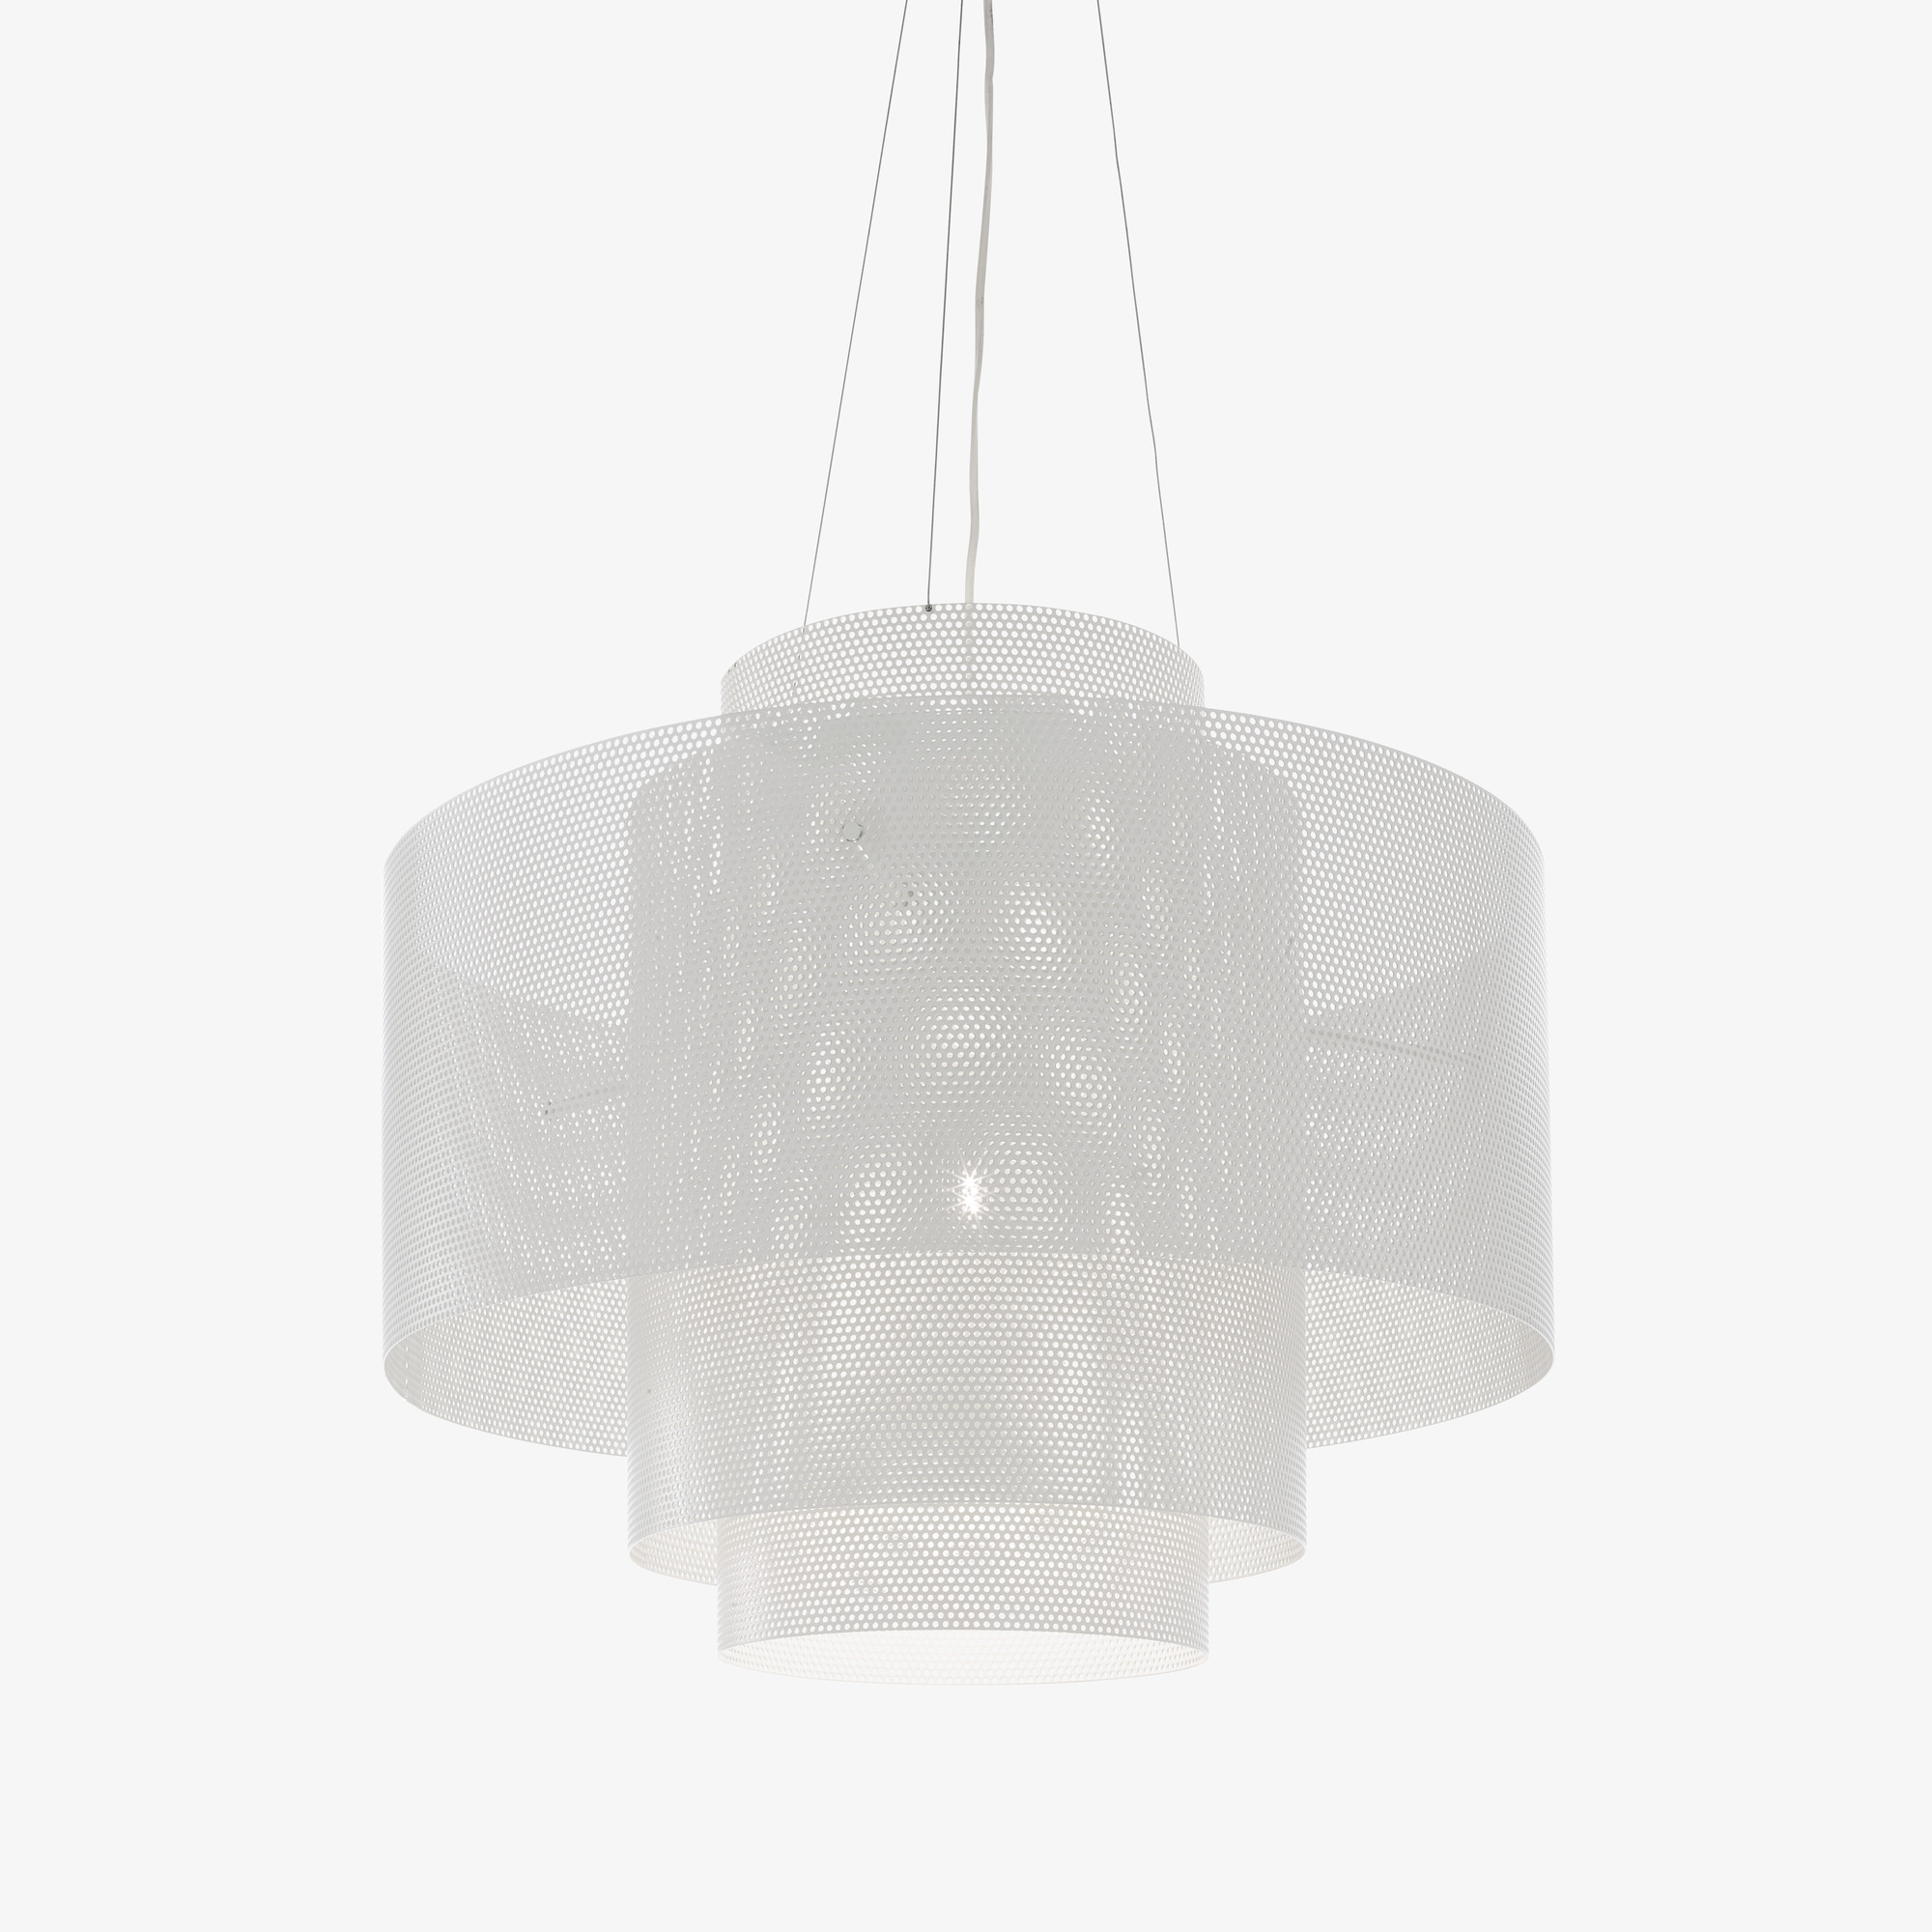 Image Suspended ceiling light   1